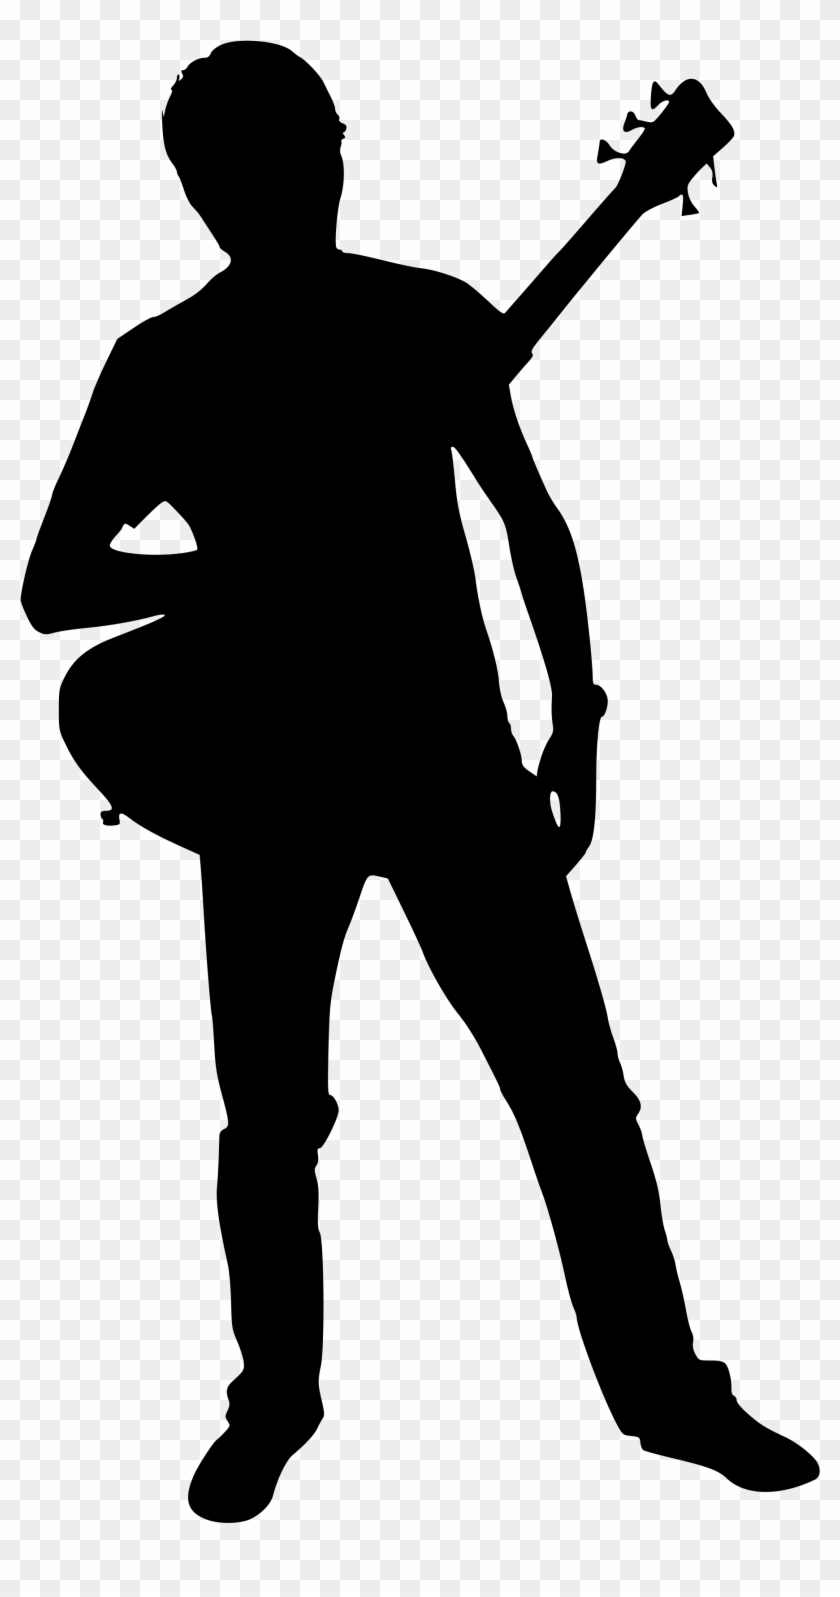 Band Silhouette Png - Silhouette Guitar Player Png Clipart #2850391